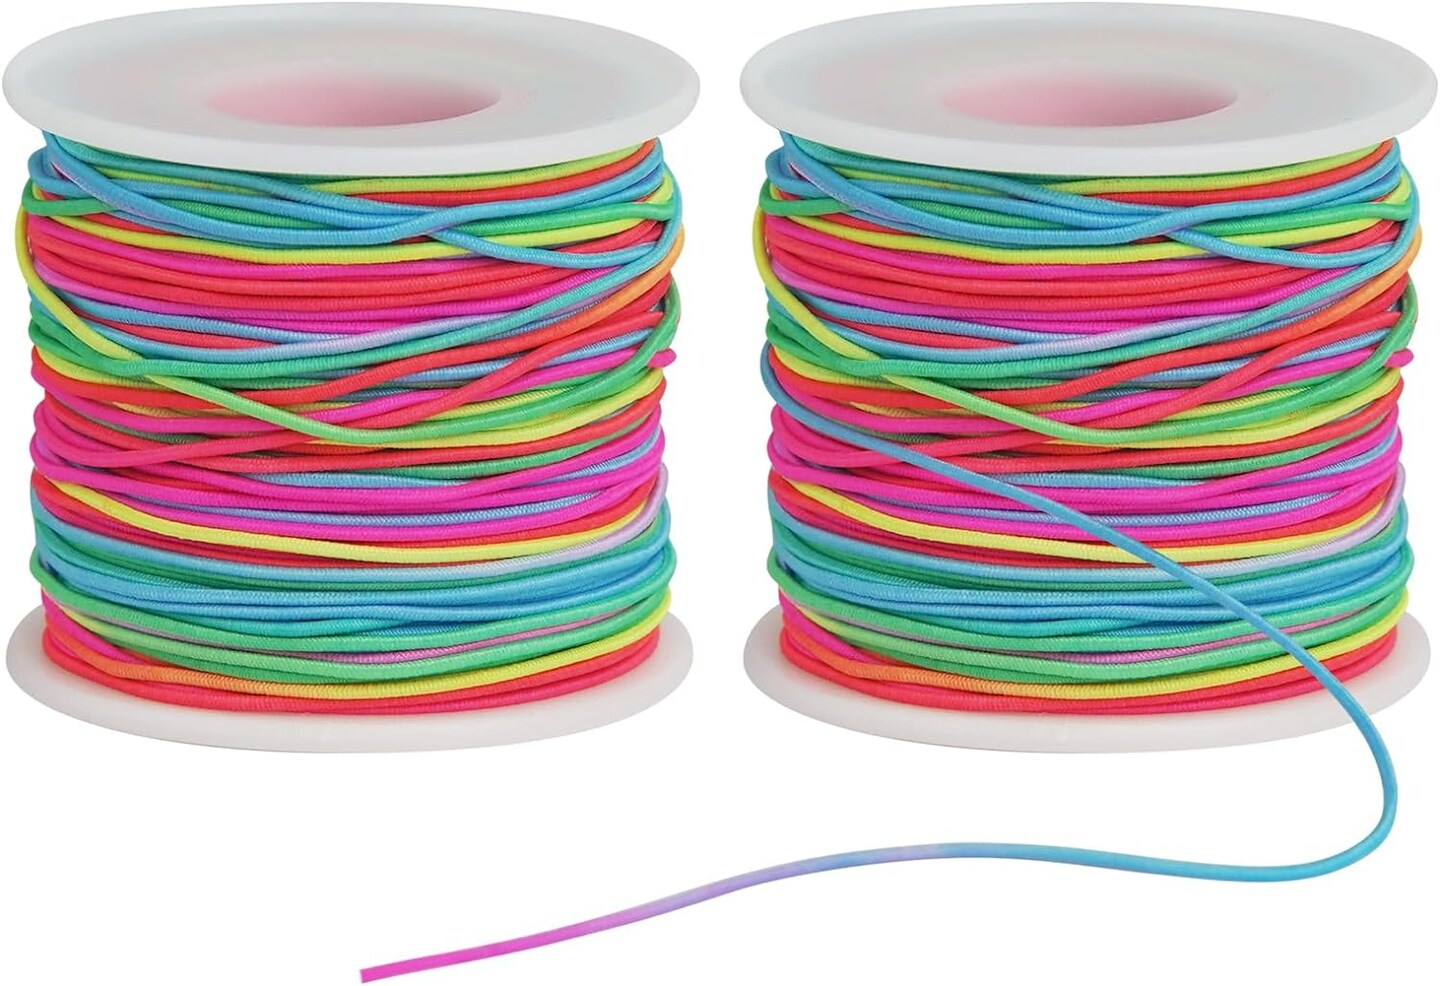 Bracelet String Elastic Cord - 2 Rolls 1MM Stretchy String for Bracelet Making, Rainbow Elastic Bracelets String Thread for Clay Beads, Bracelets, Jewelry Making, Necklaces, Sewing and Crafts